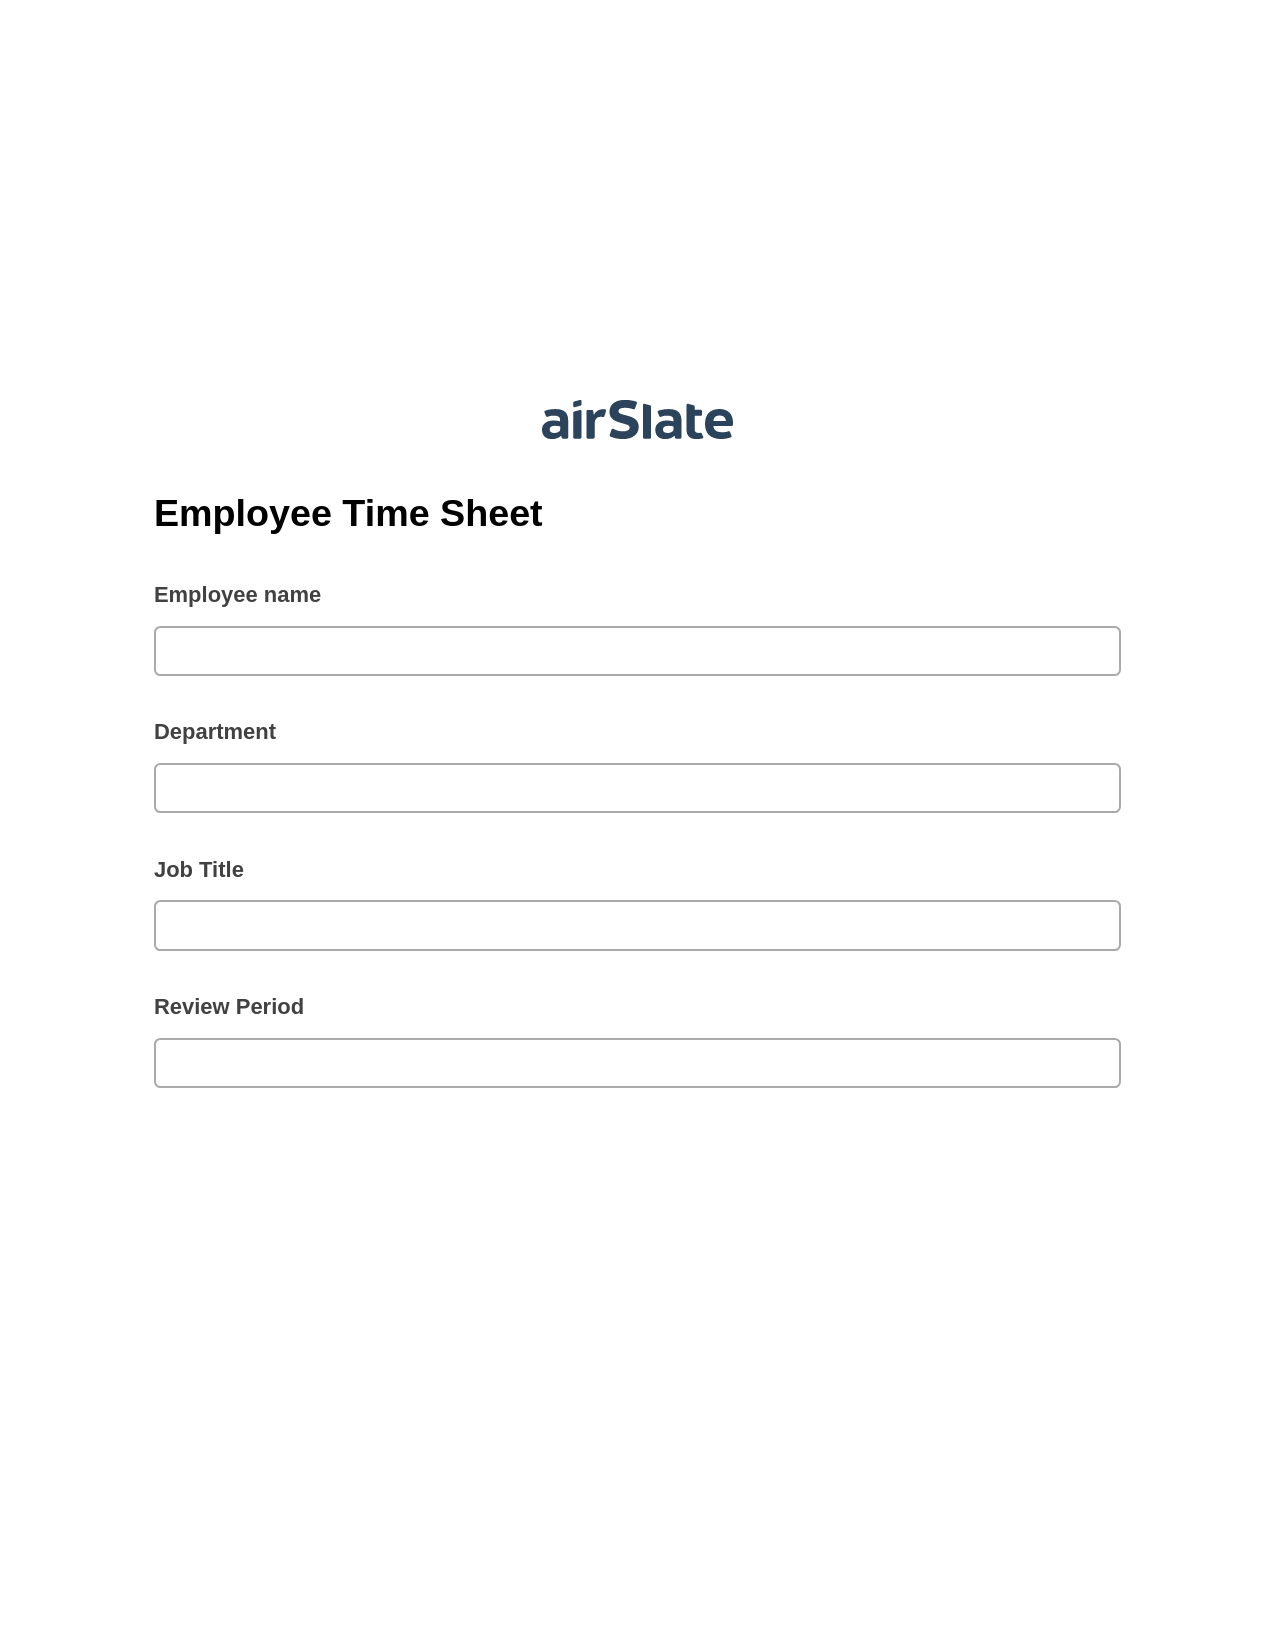 Employee Time Sheet Pre-fill from another Slate Bot, Create Salesforce Records Bot, Archive to OneDrive Bot